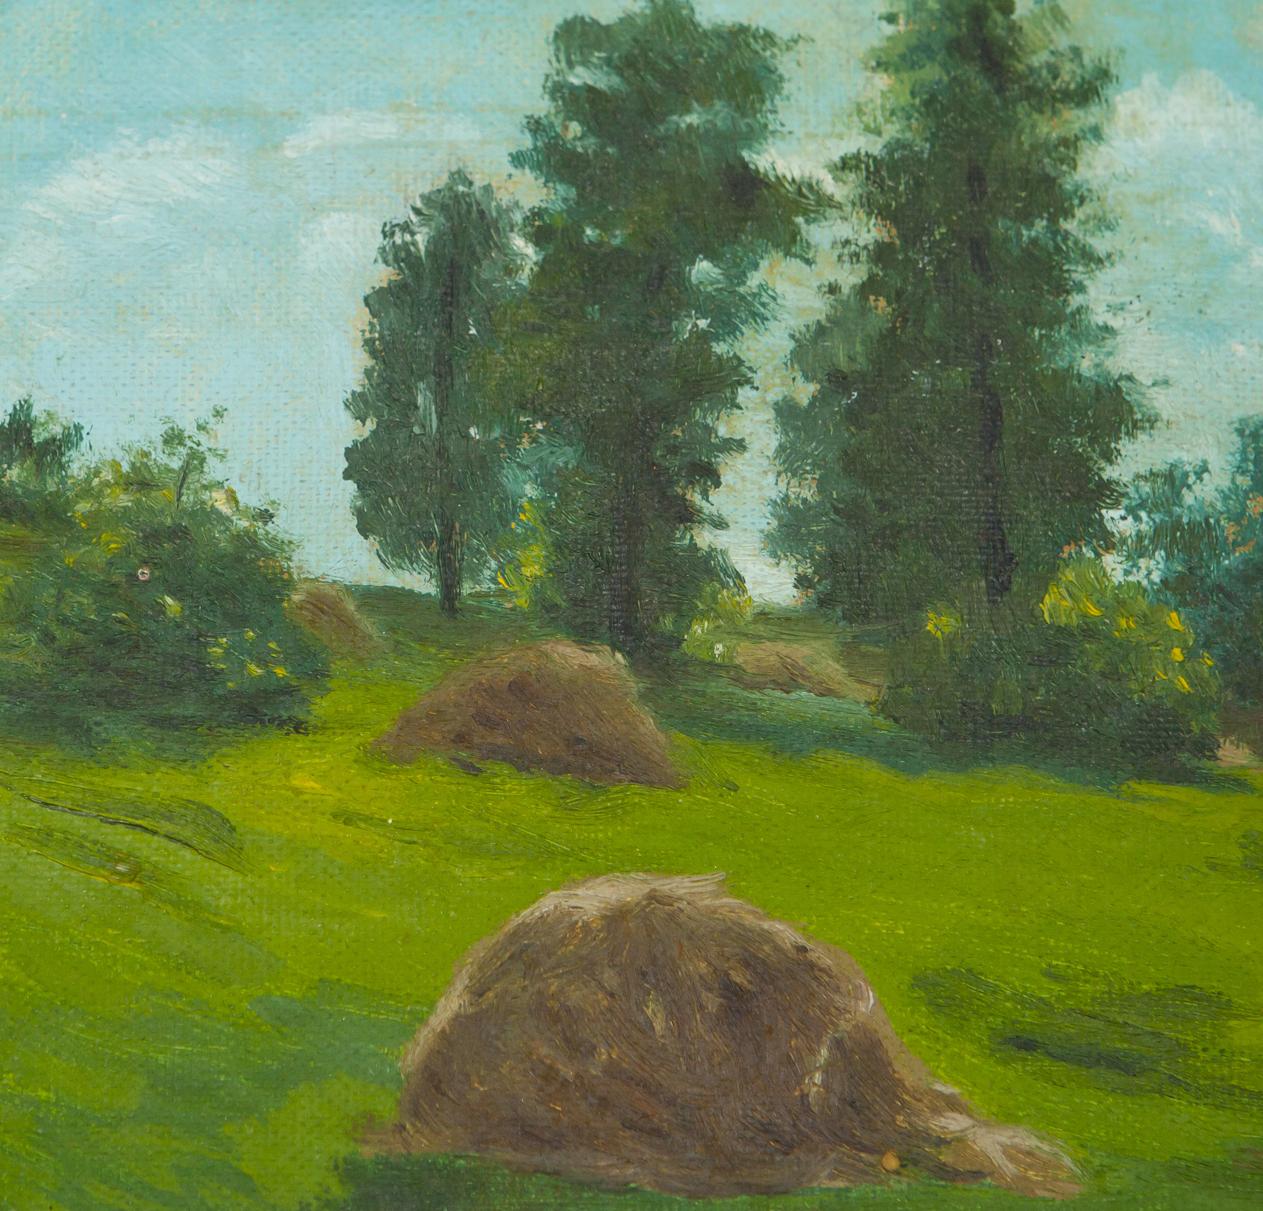 The oil painting titled "Forest, Nature, Haystack" by Ivan Kirillovich Tsyupka